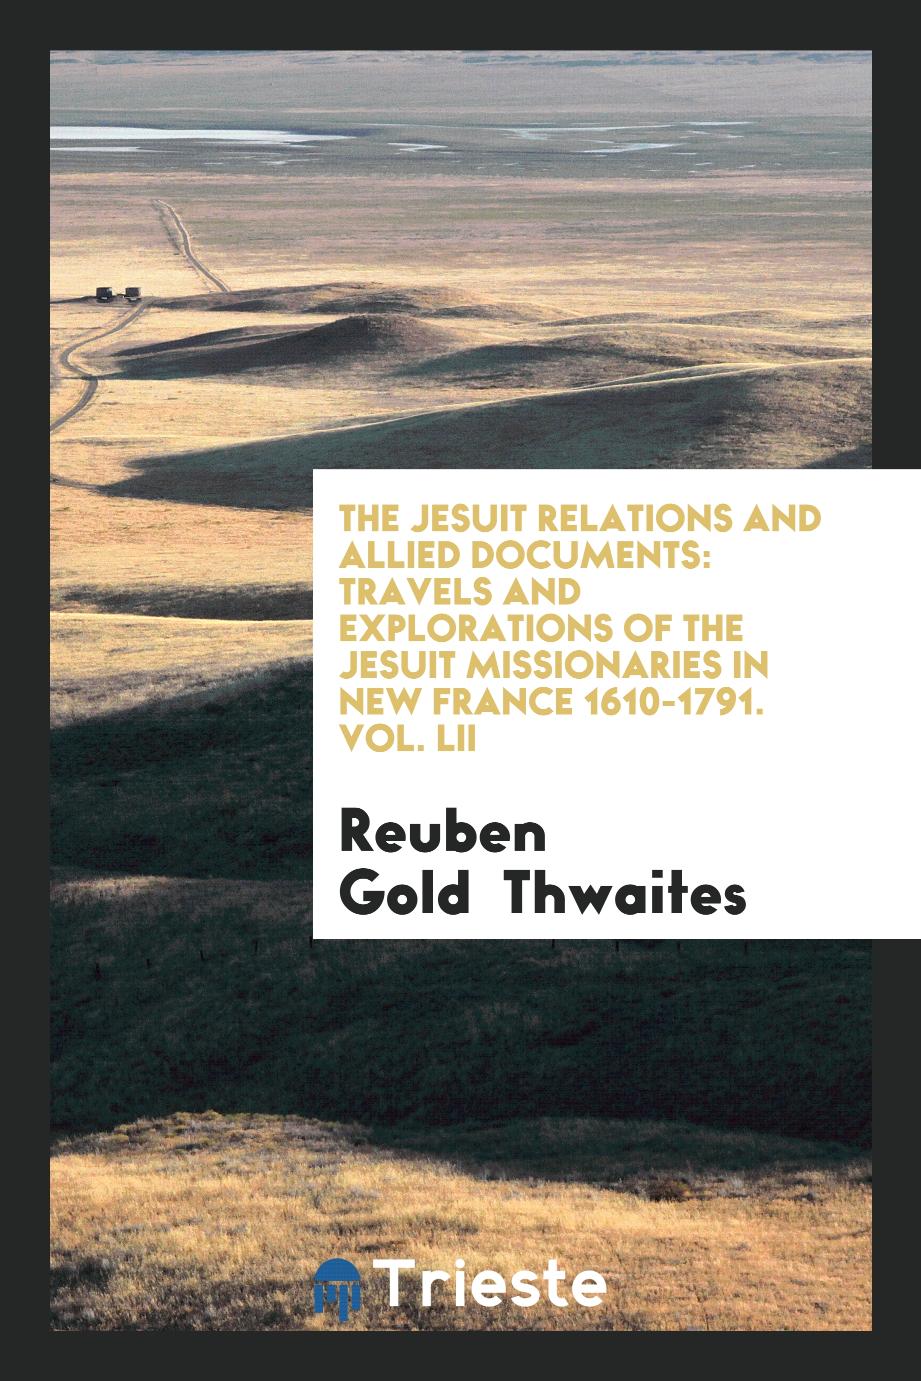 The Jesuit Relations and Allied Documents: Travels and Explorations of the Jesuit Missionaries in New France 1610-1791. Vol. LII